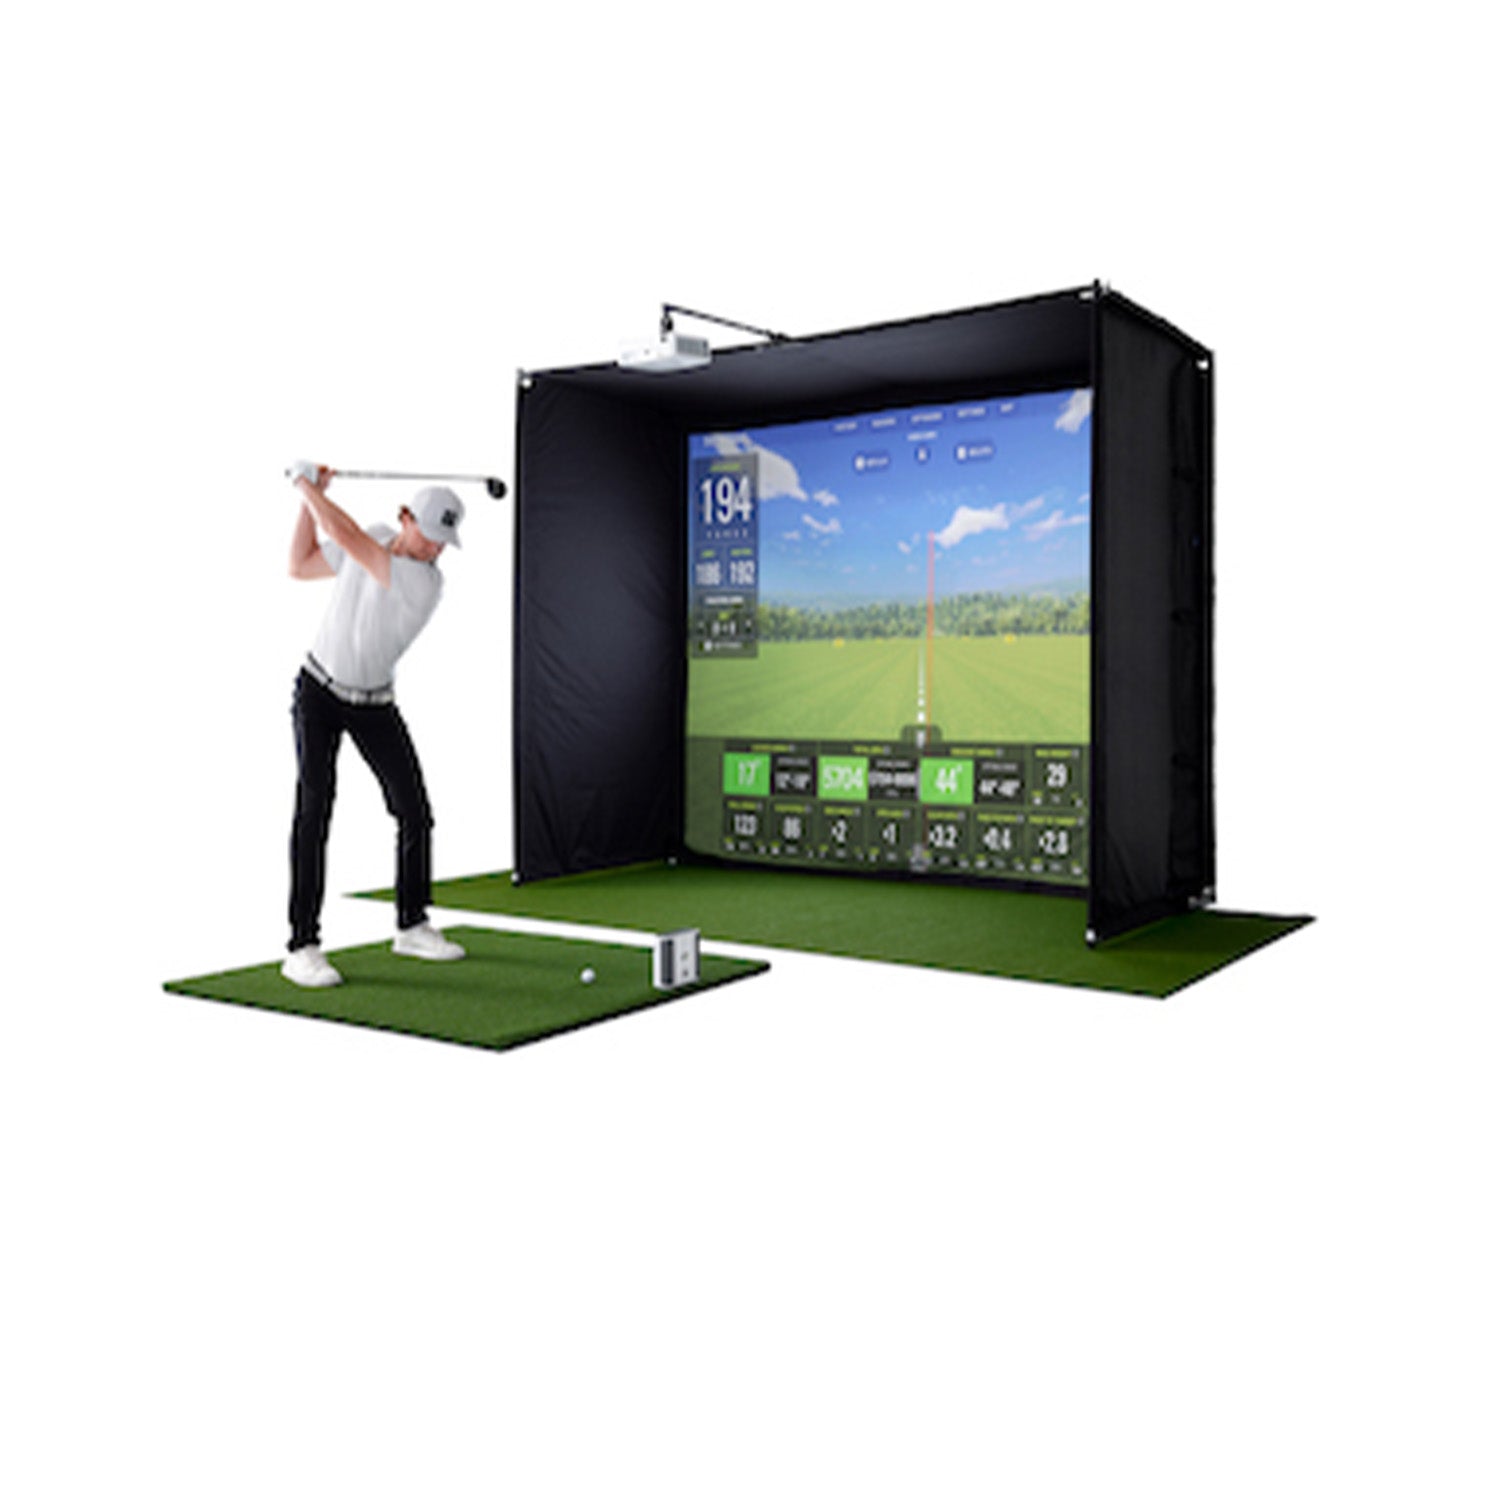 Man playing golf simulation with SKYTRAK plus launch monitor